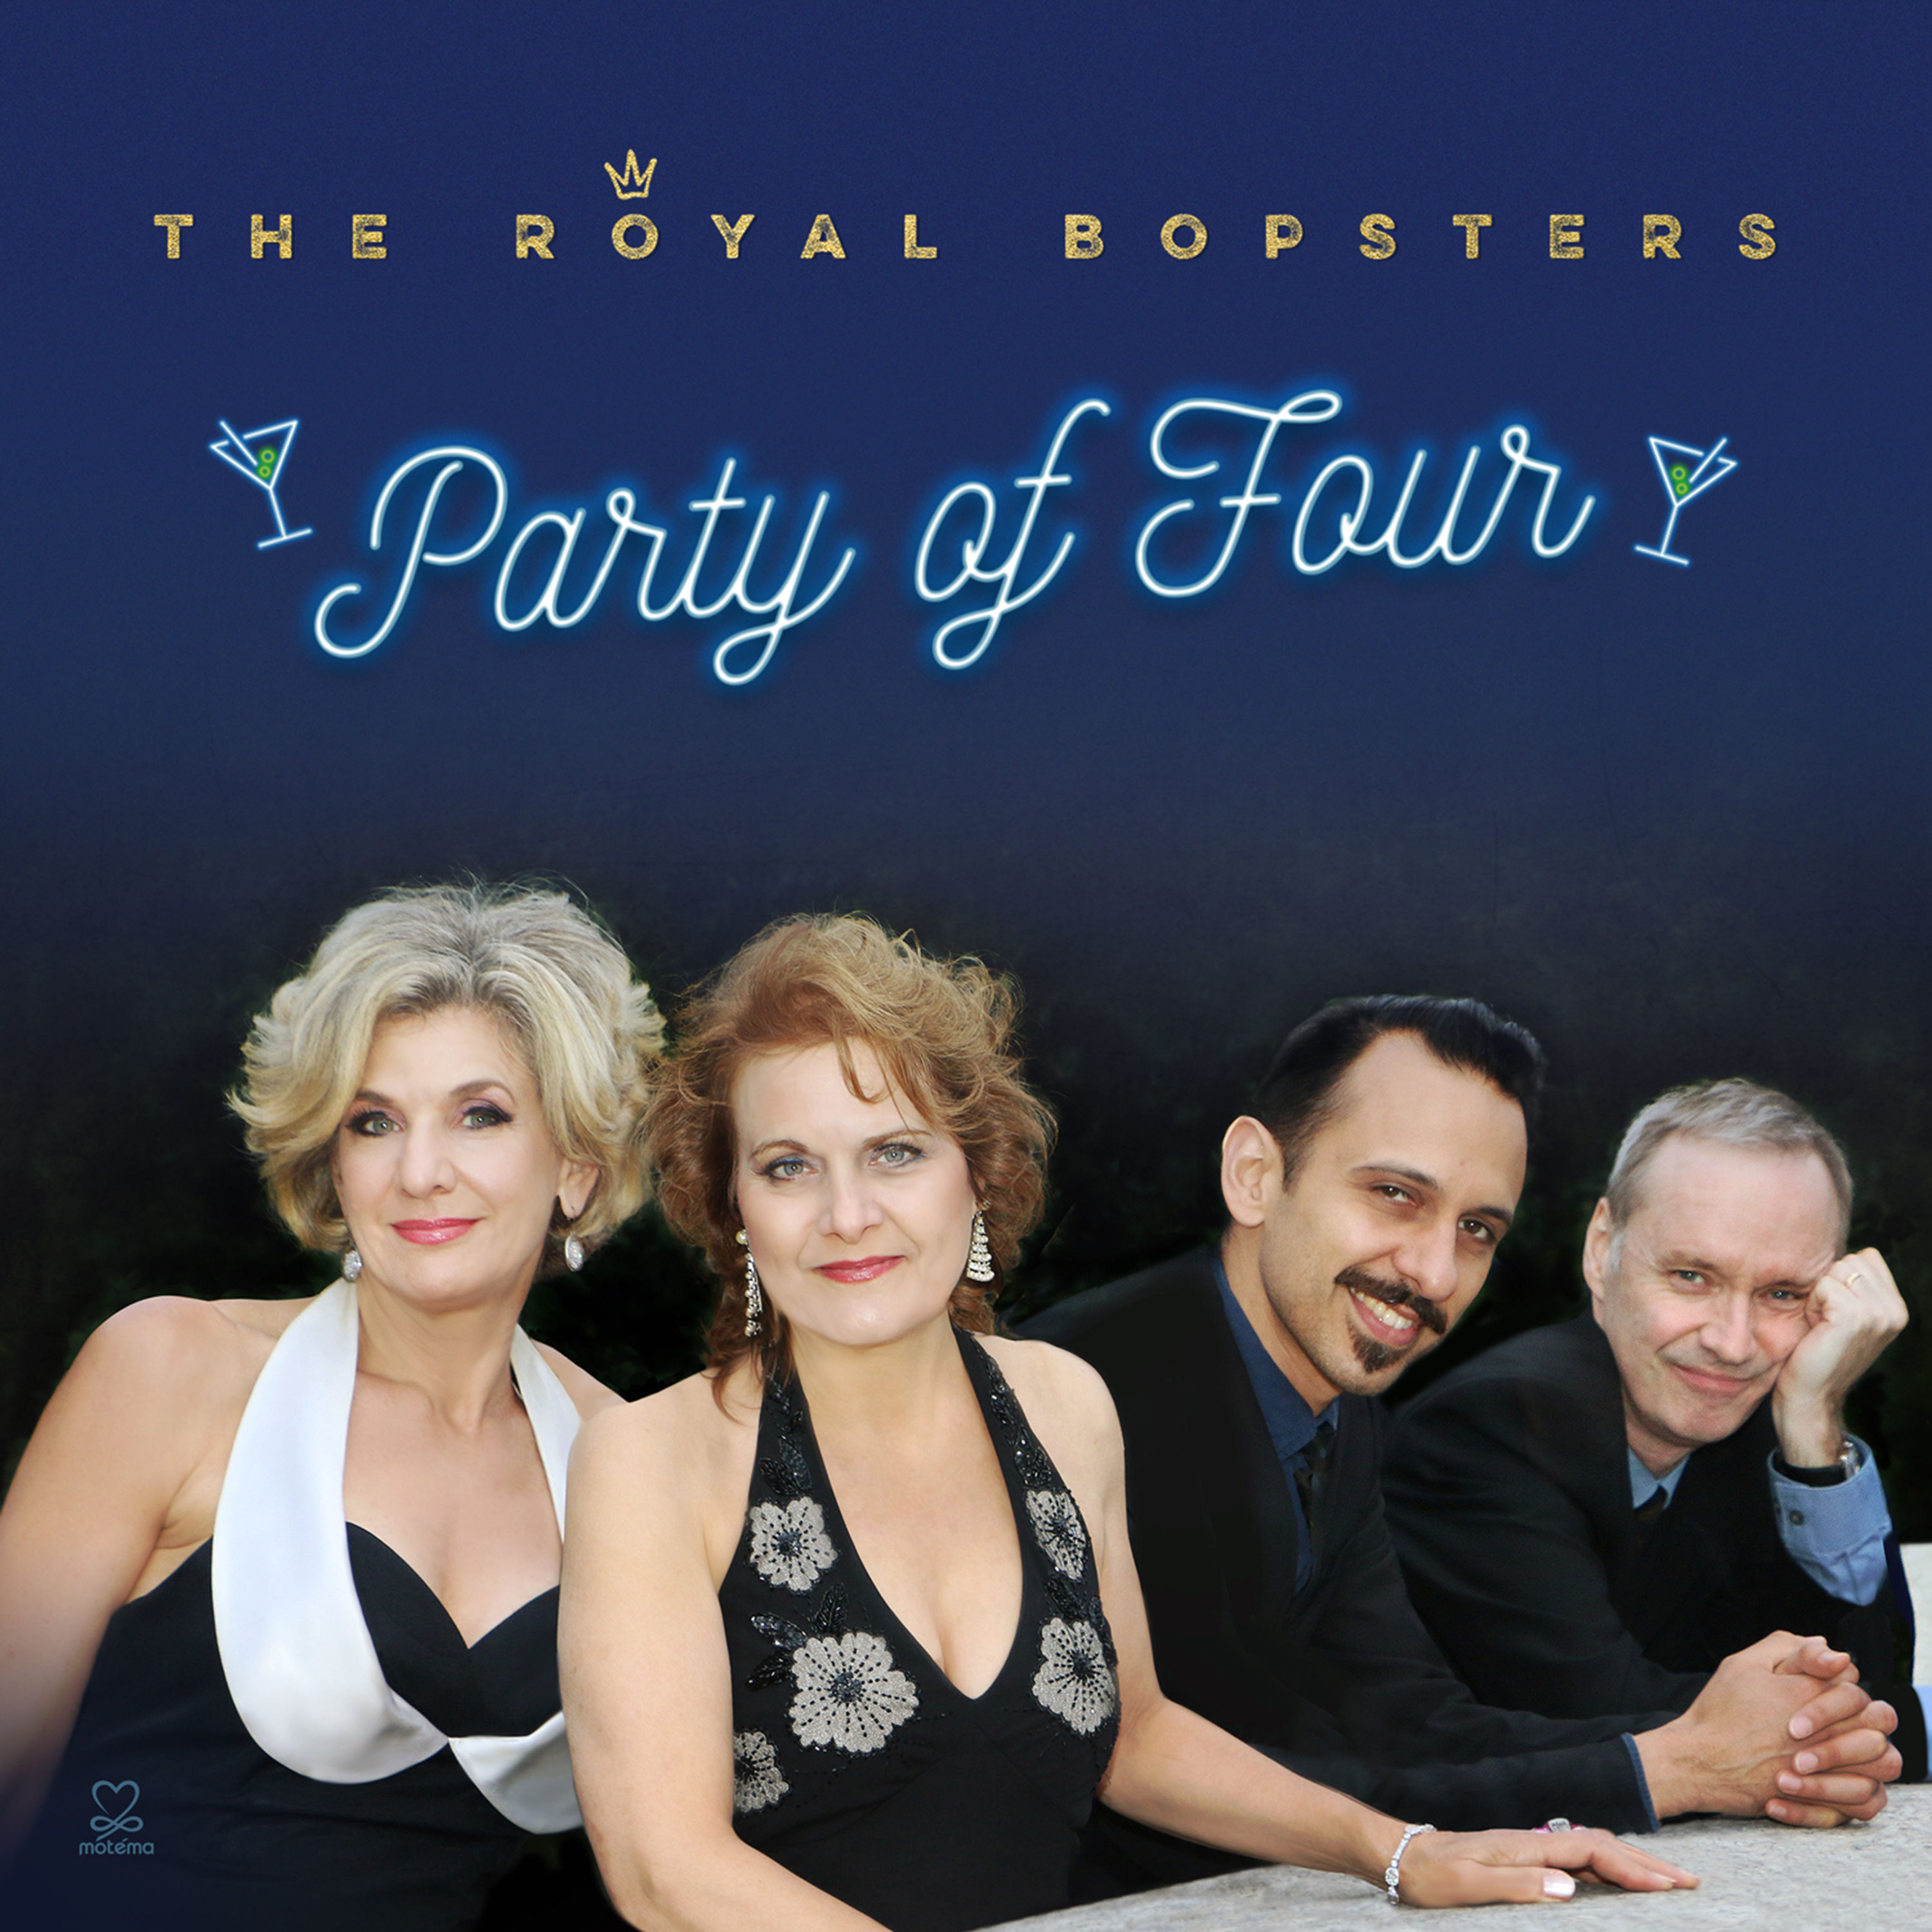 The Royal Bopsters - Party of Four (2020) [FLAC 24bit/48kHz]